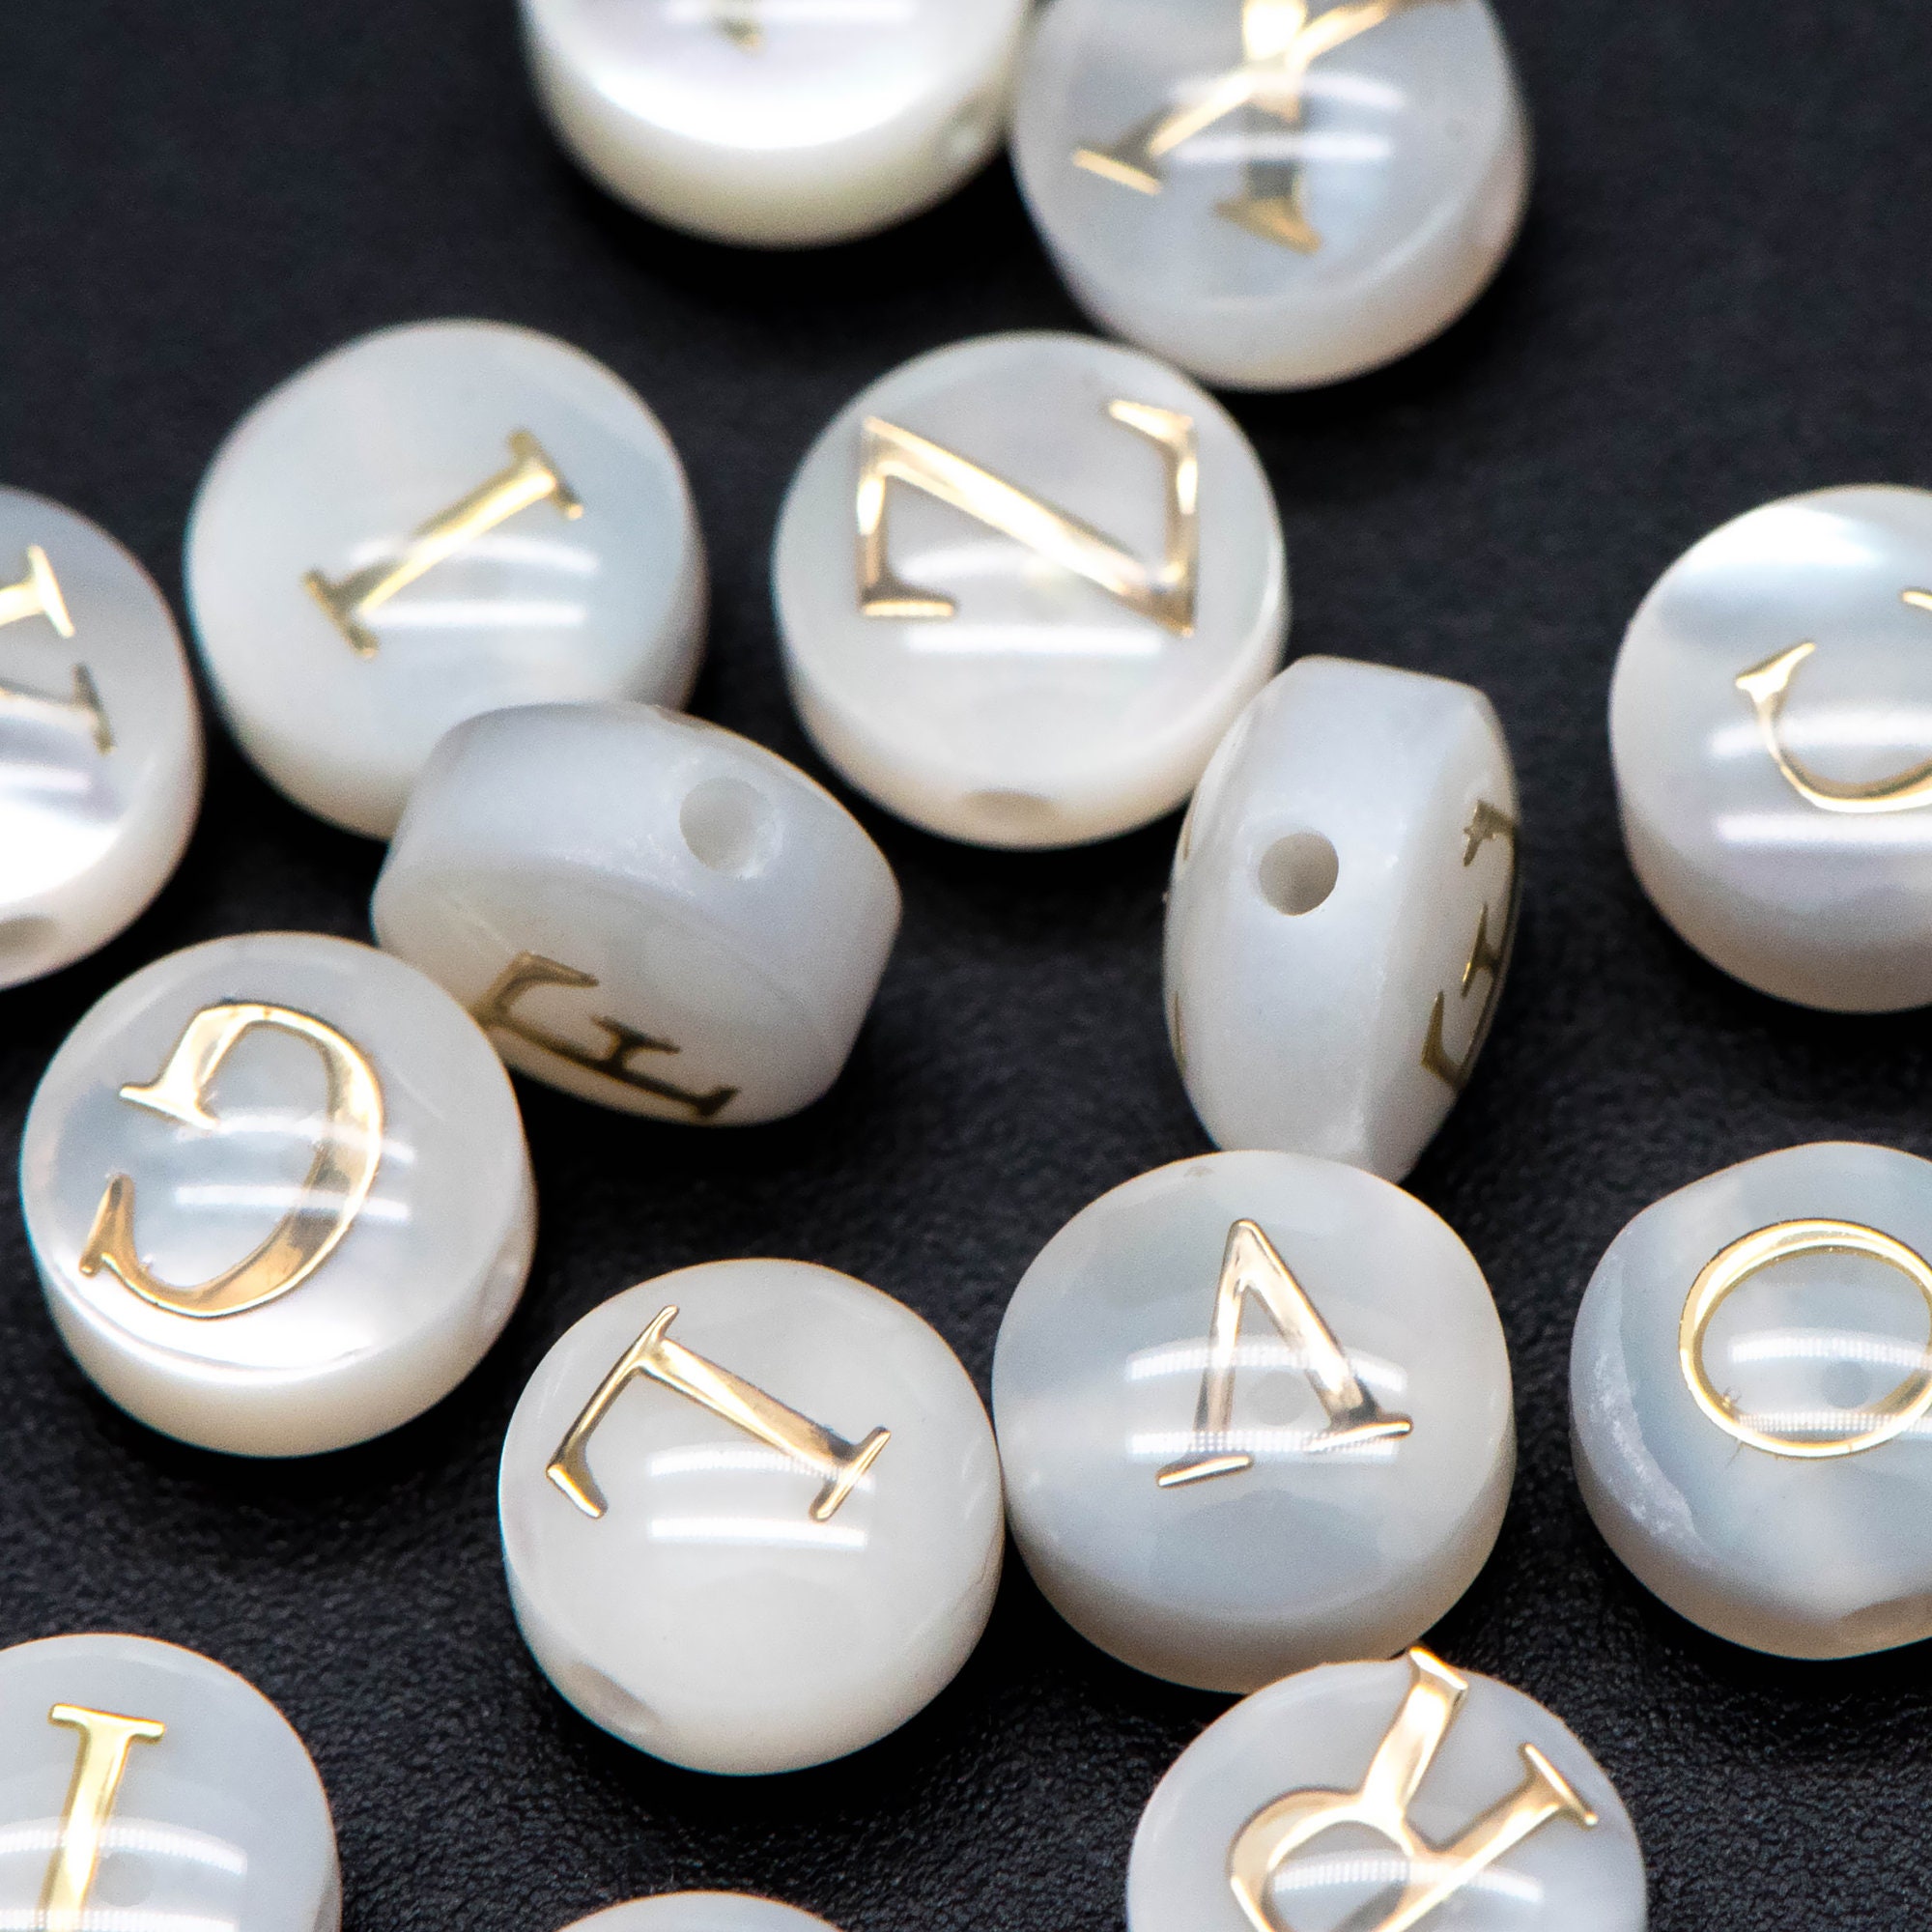 Letter A Alphabet Beads, White beads with Gold Letters 7MM